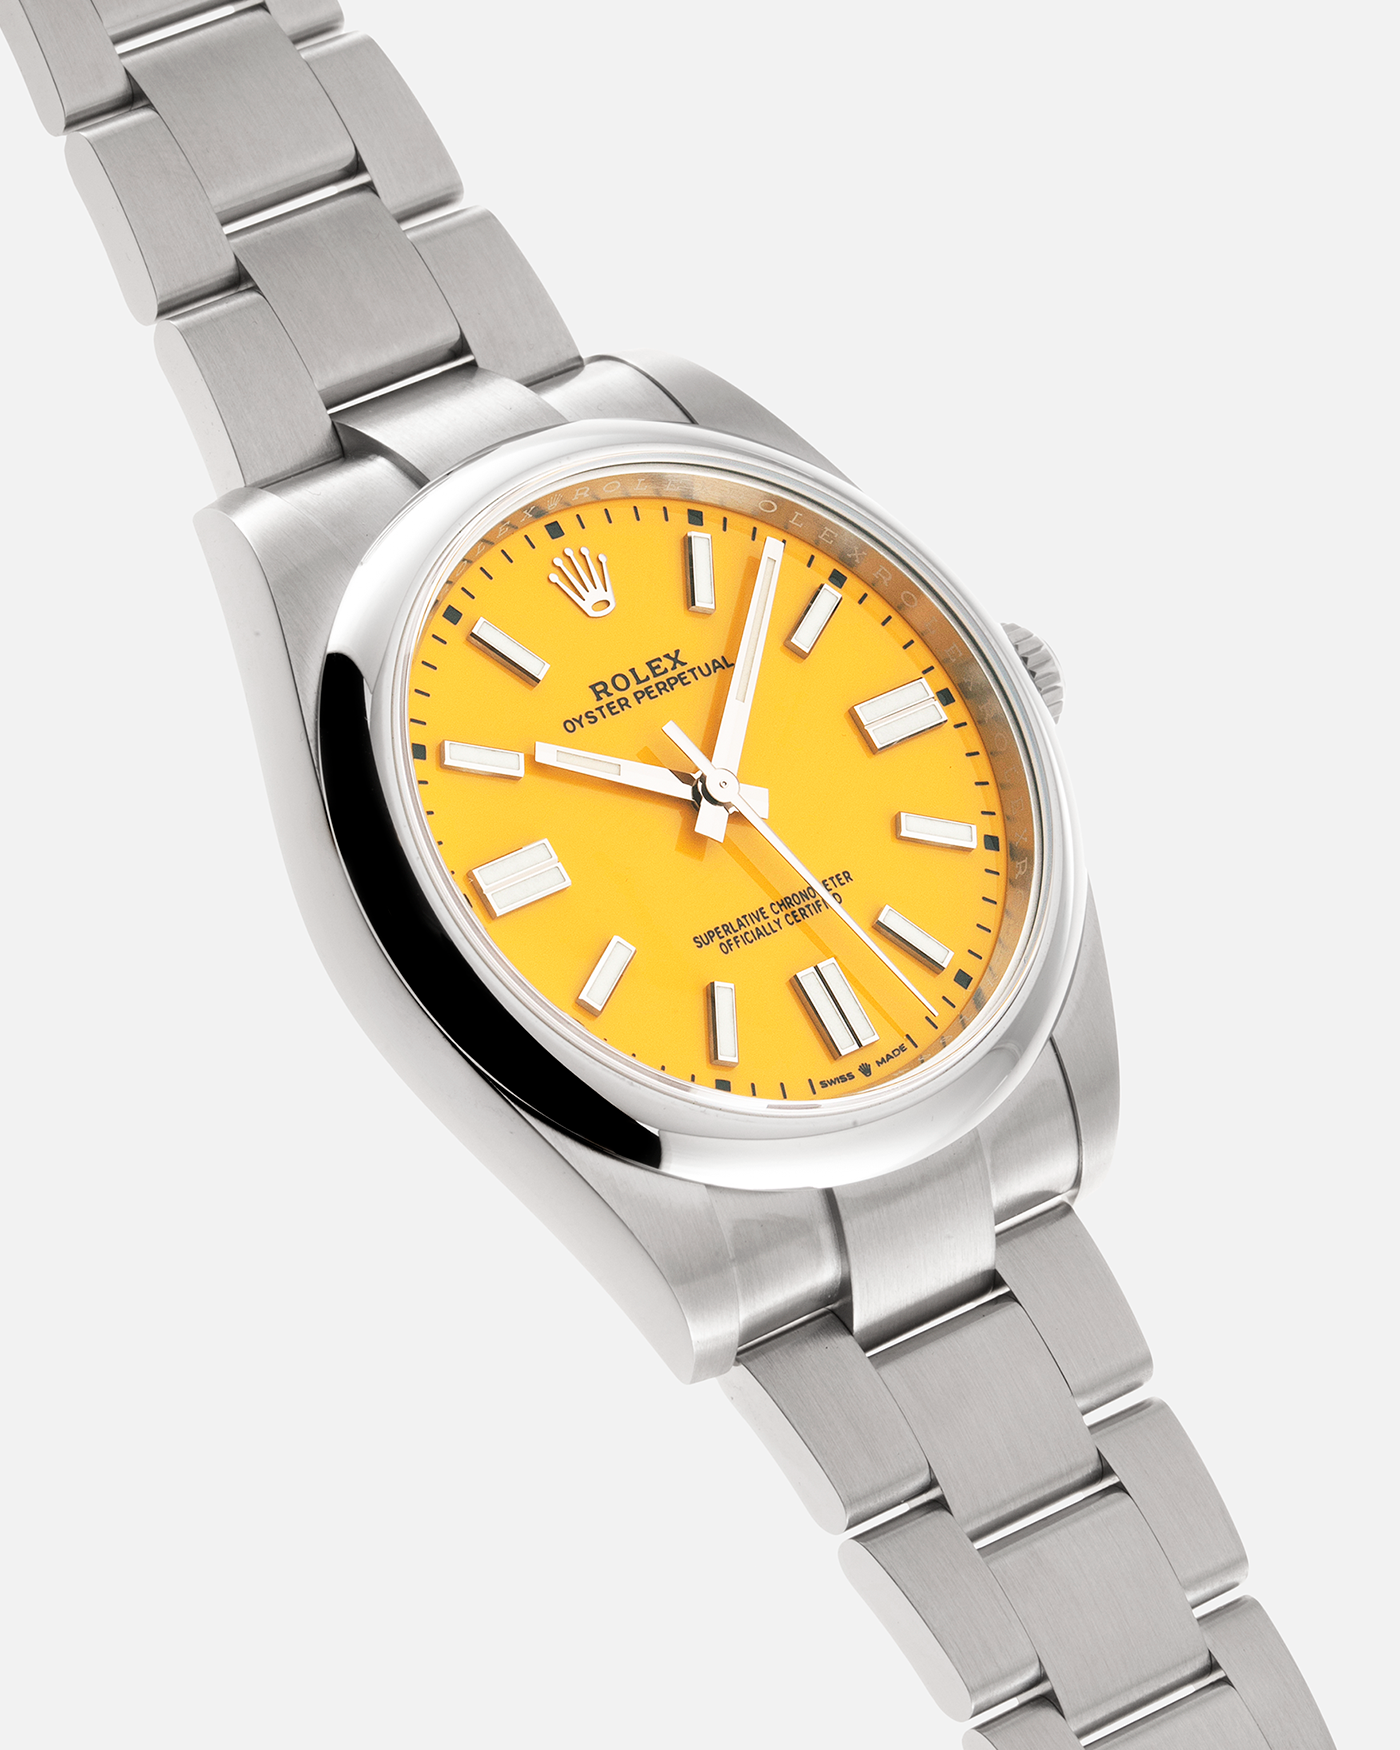 Rolex Oyster Perpetual 124300 Yellow 41mm Watch | S.Song Vintage ...